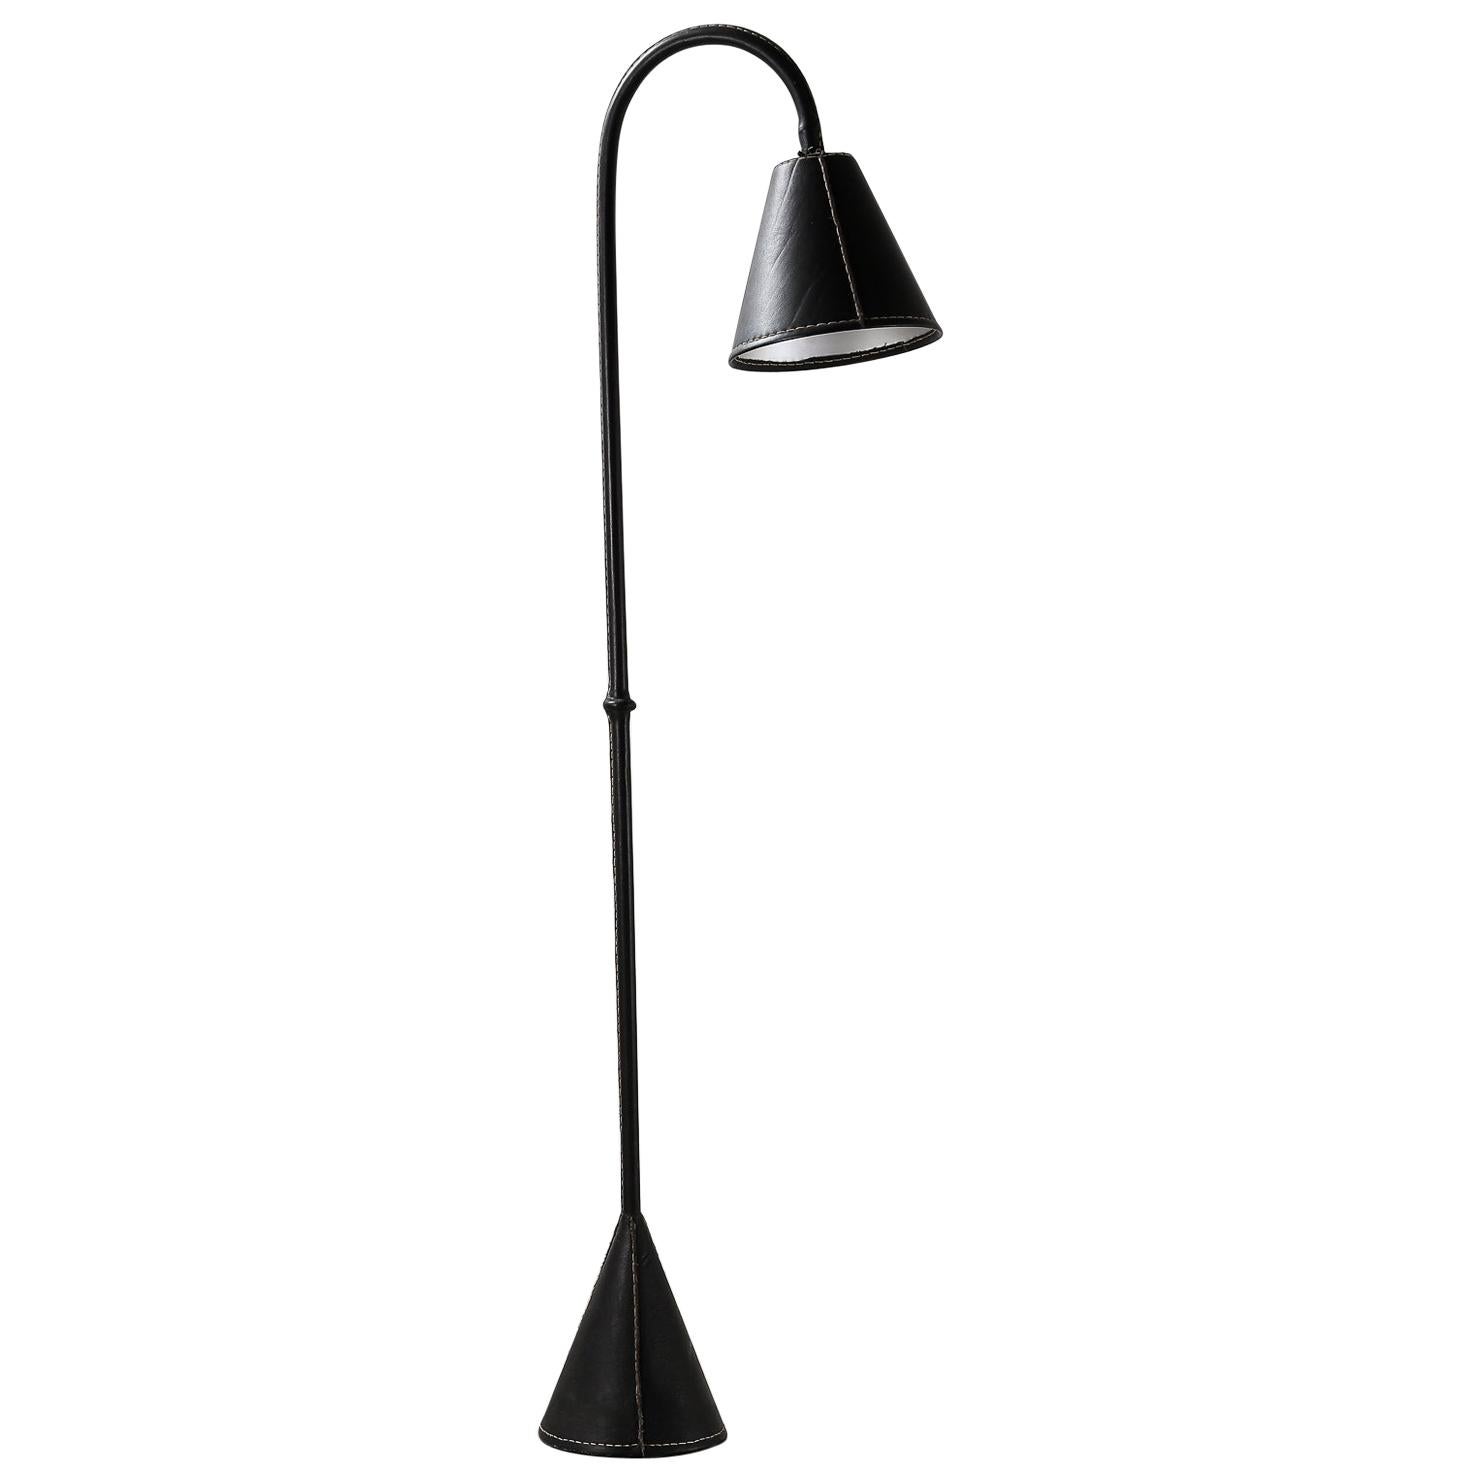 Classic Valenti Black Leather Floor Lamp Spanish 1960s with Stitching Detail